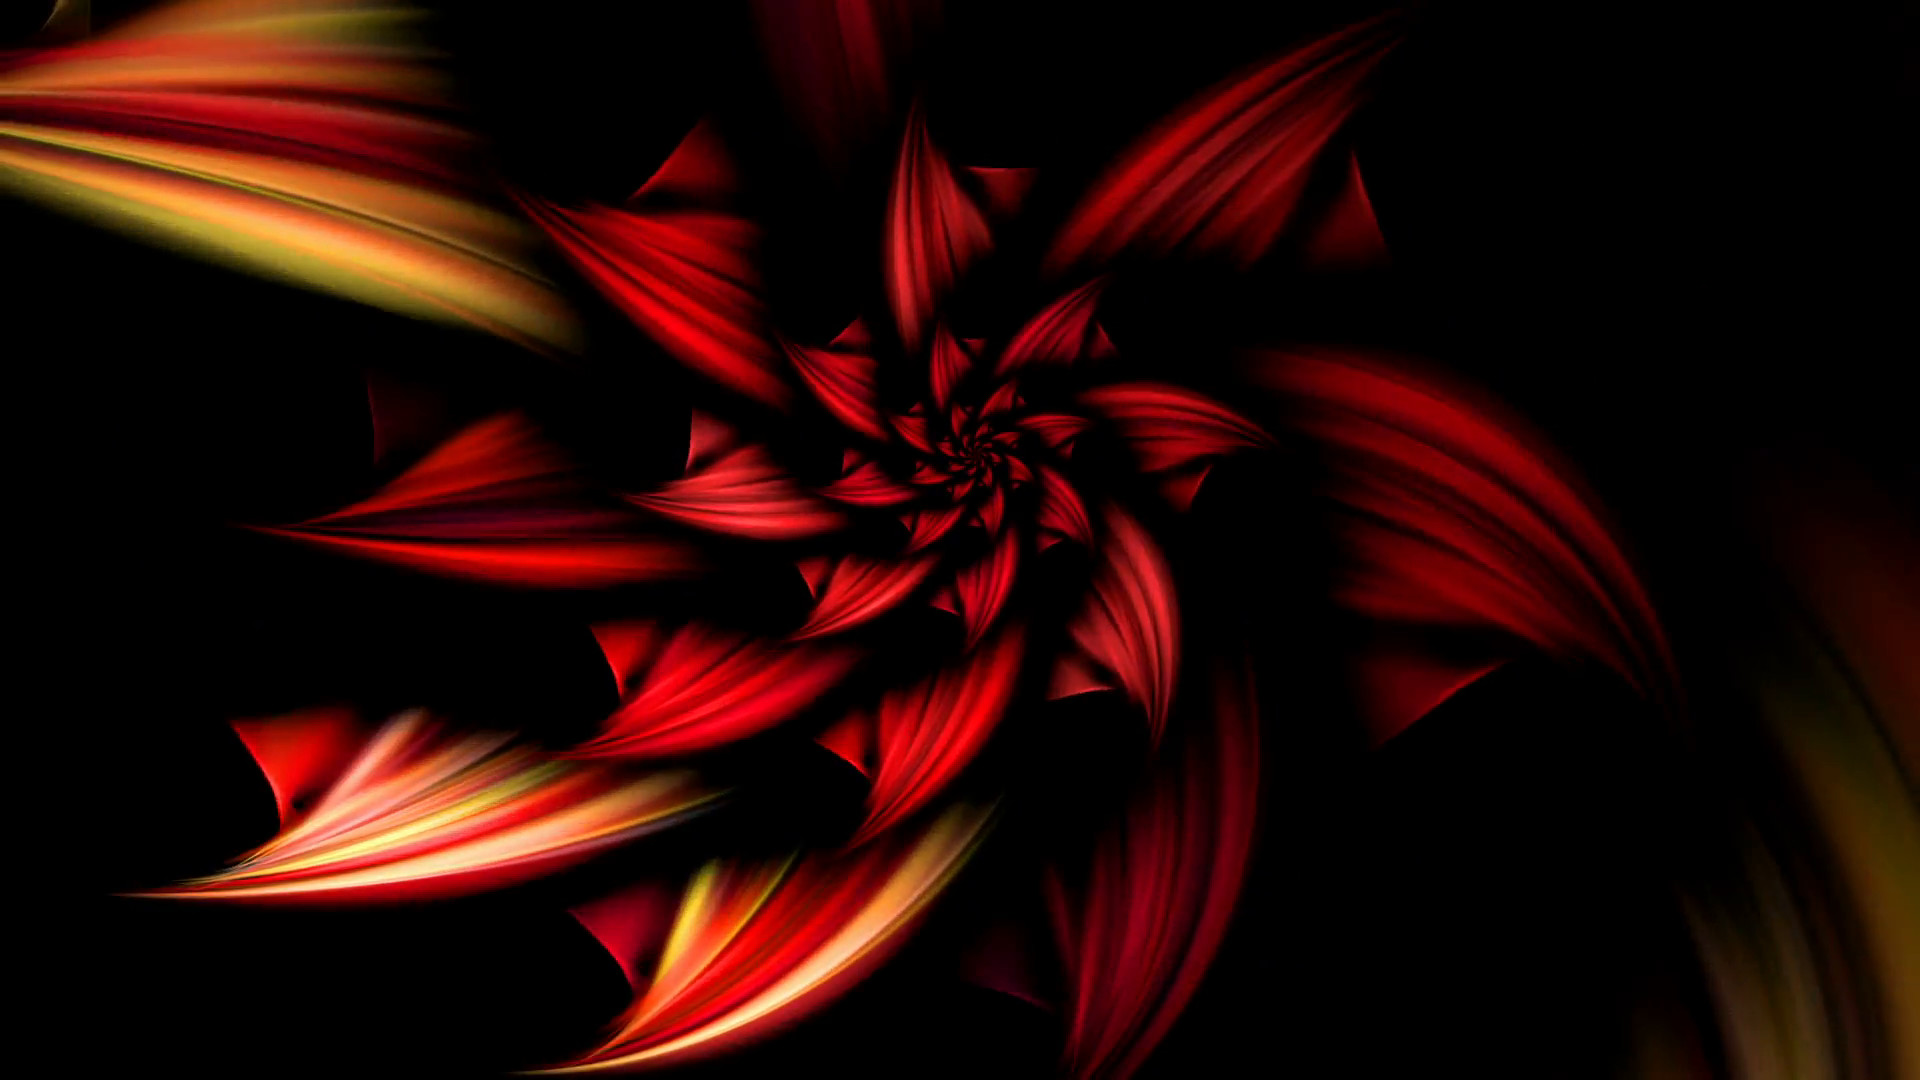 1920x1080 Subscription Library Fiery Flower - red fiery flower on black background,  animated abstract illustration, 30fps,